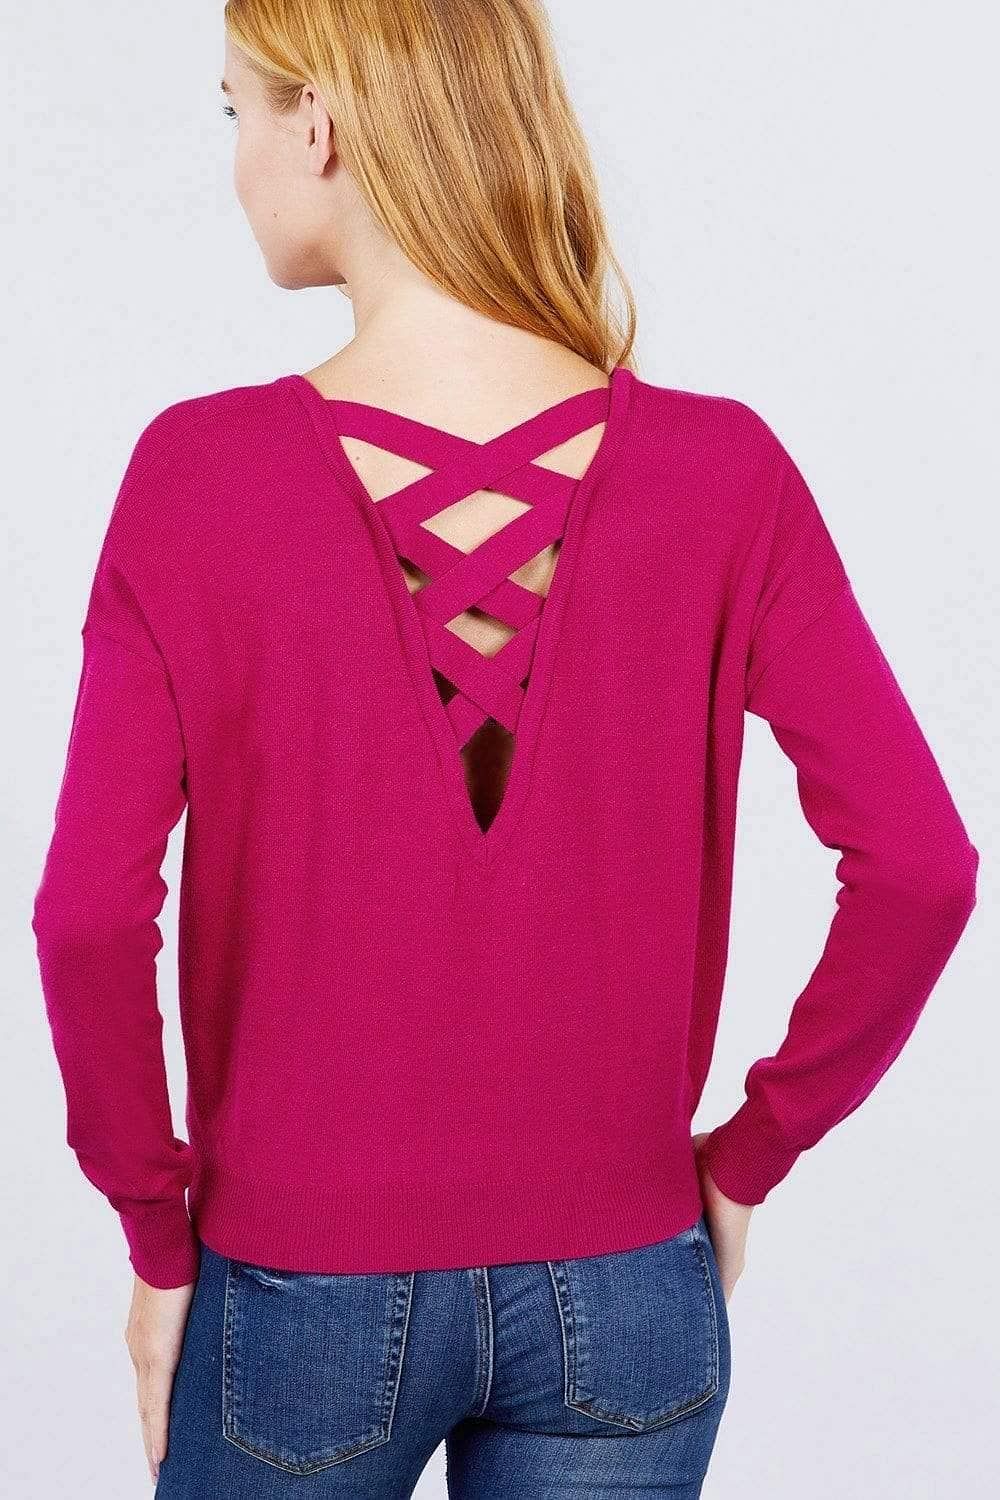 Magenta Long Sleeve V-Neck Pullover Sweater - Shopping Therapy, LLC Sweater